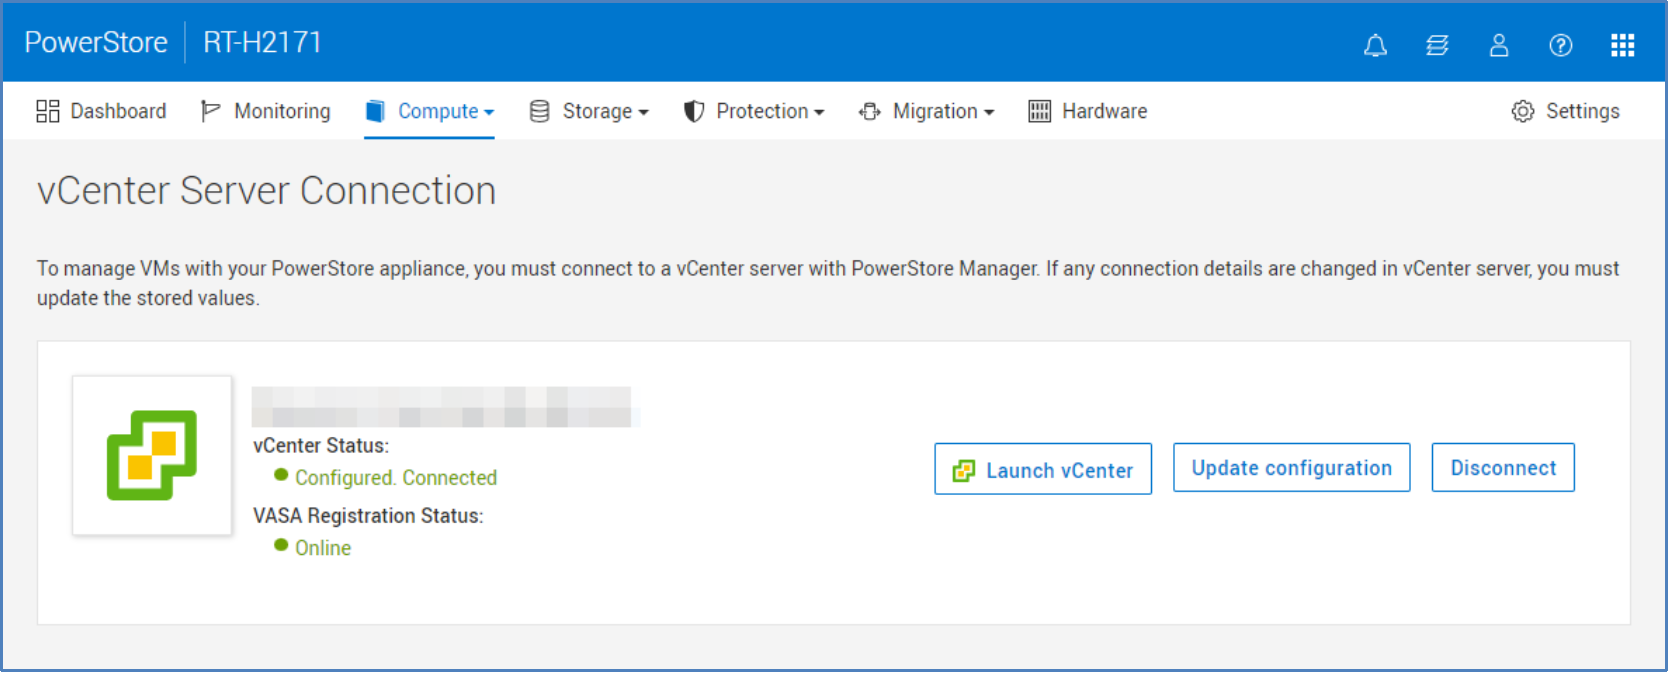 In PowerStore, a vCenter Server Connection can be established. From this page, the connection can be managed.